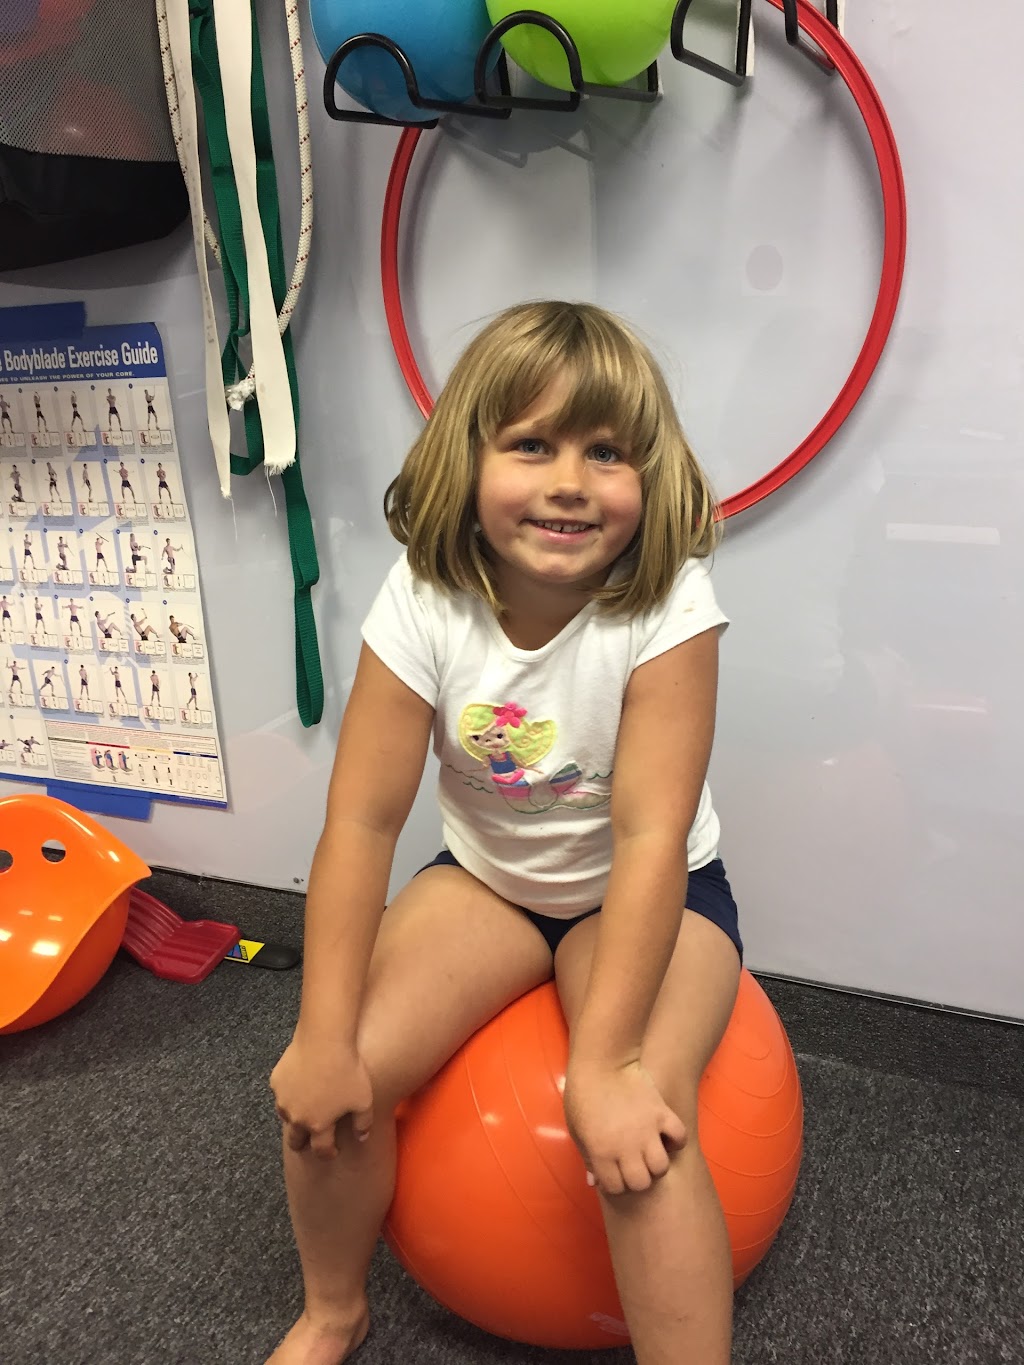 Kids in Motion Pediatric Therapy Services | 7822 Andersonville Rd, City of the Village of Clarkston, MI 48346, USA | Phone: (248) 707-3100